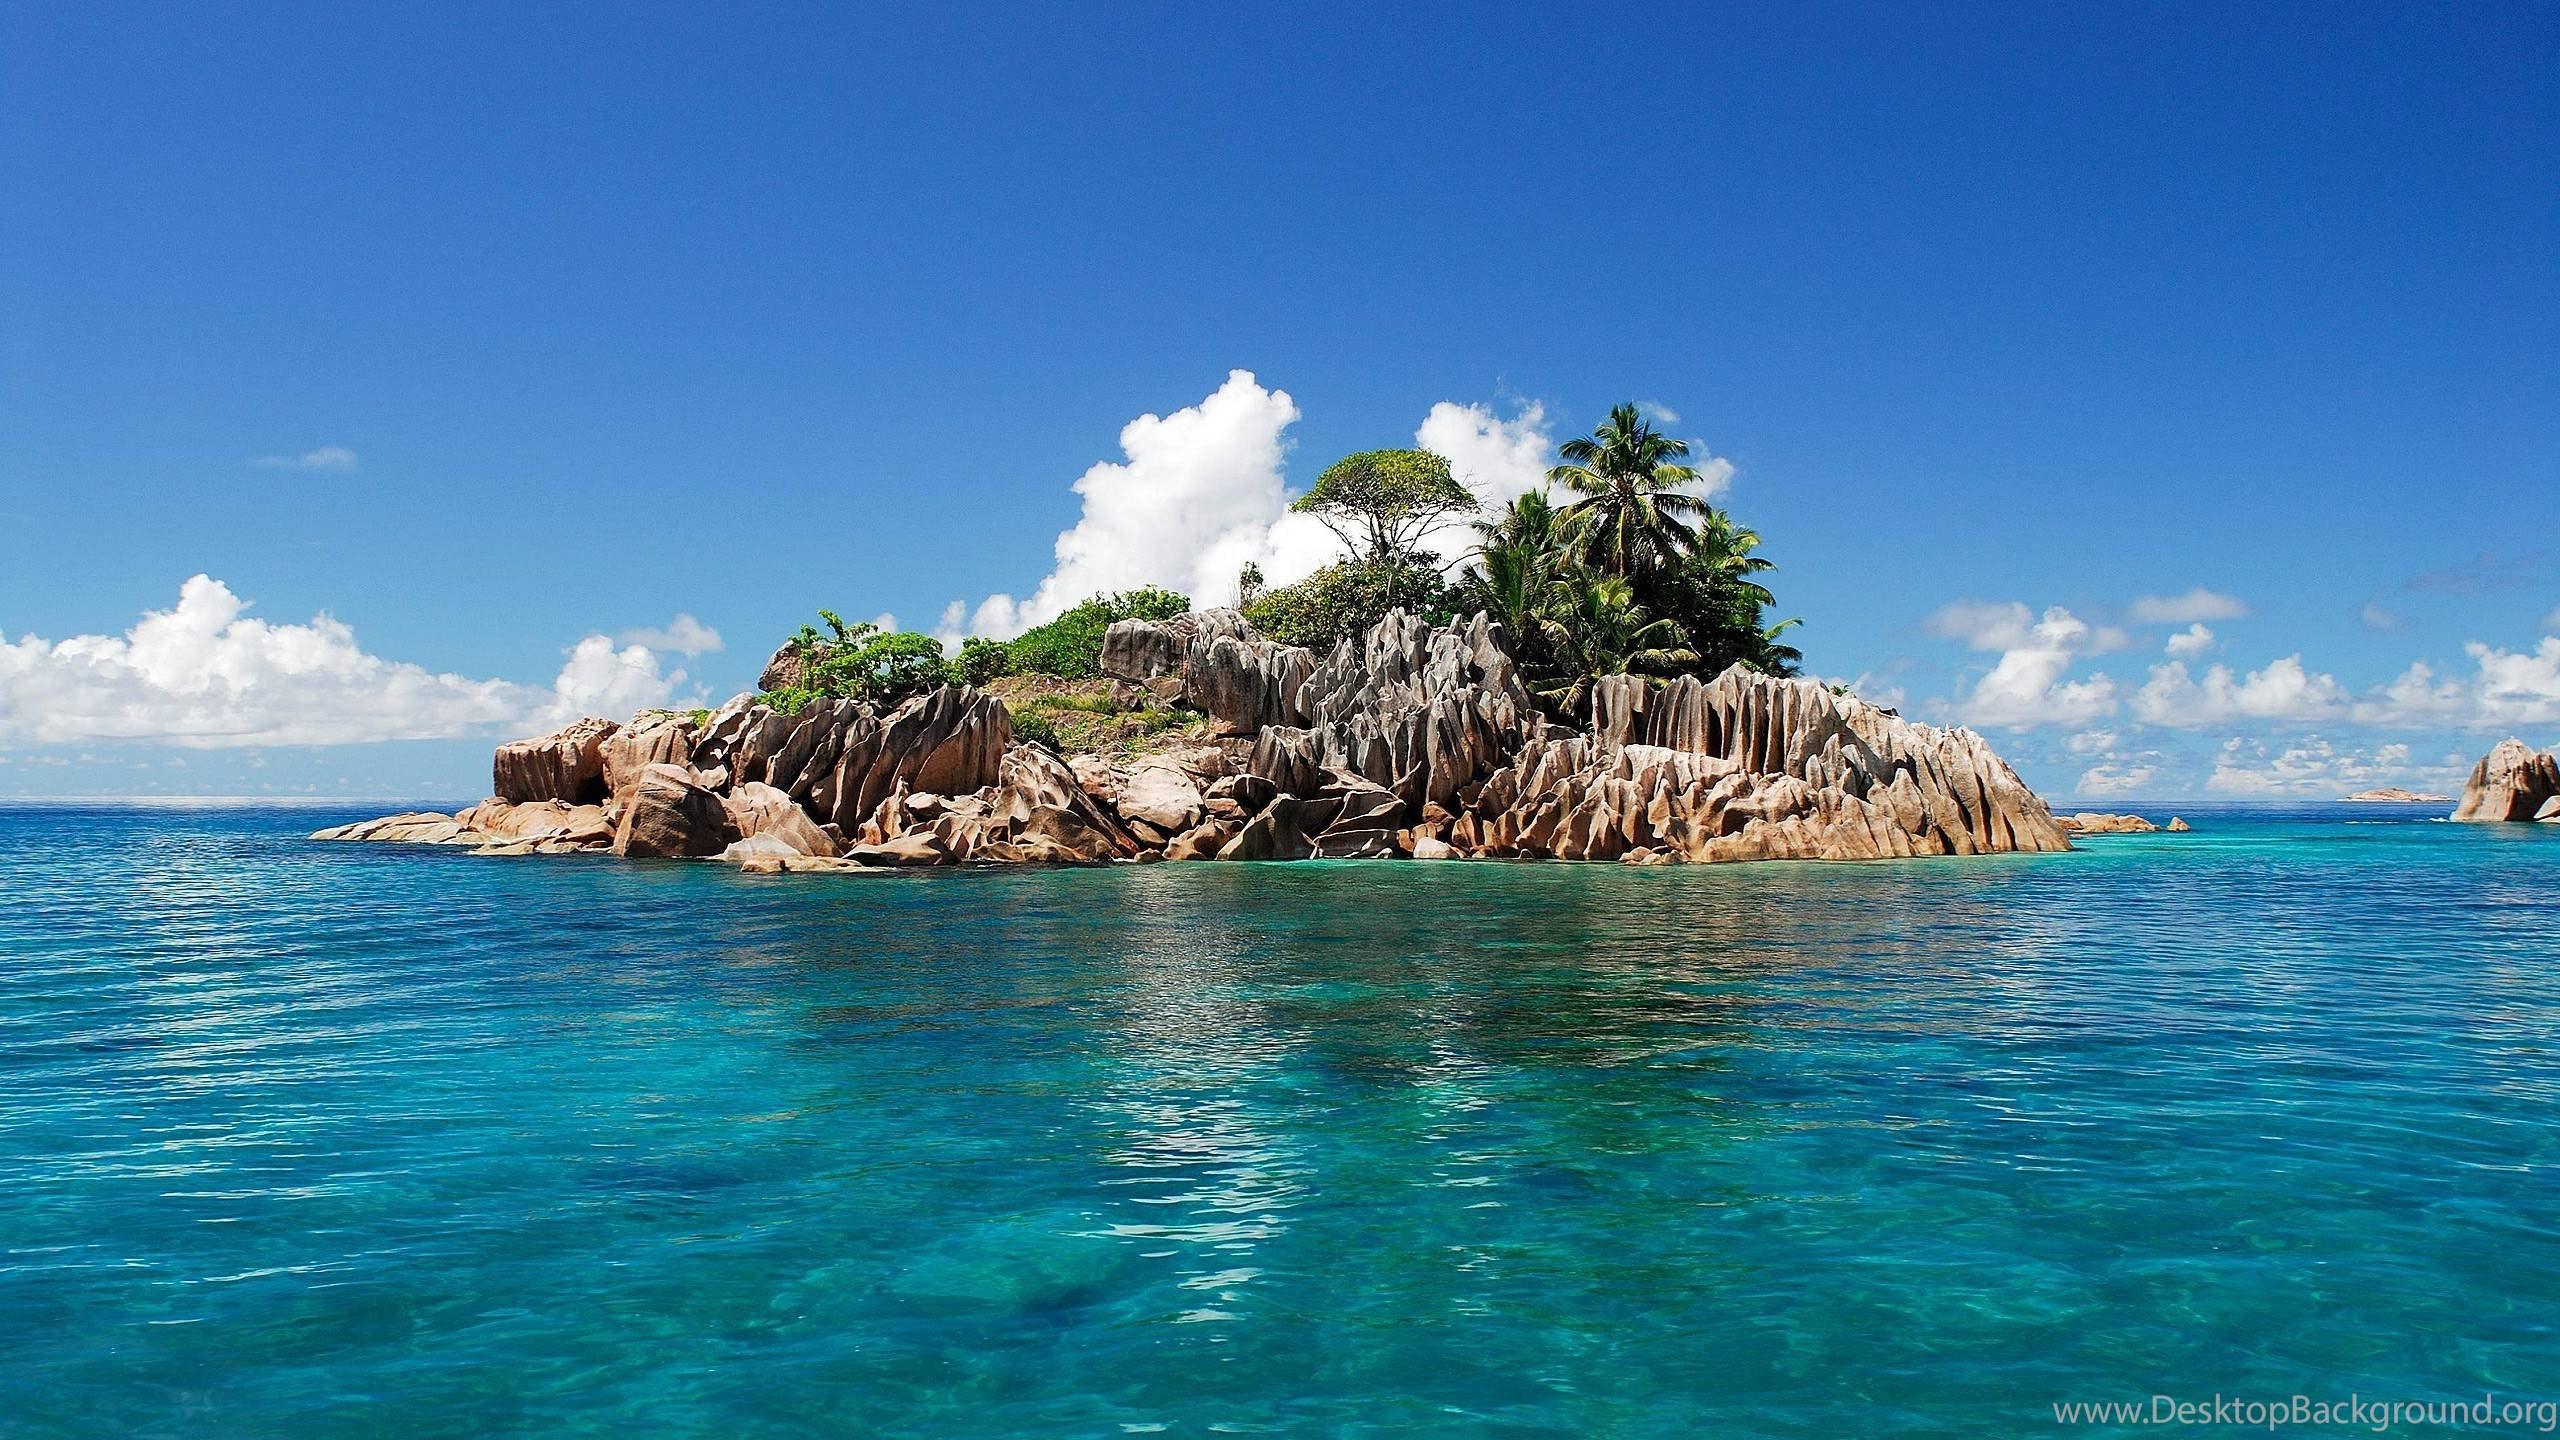 Beautiful Island Android Wallpaper Hunter island android wallpapers